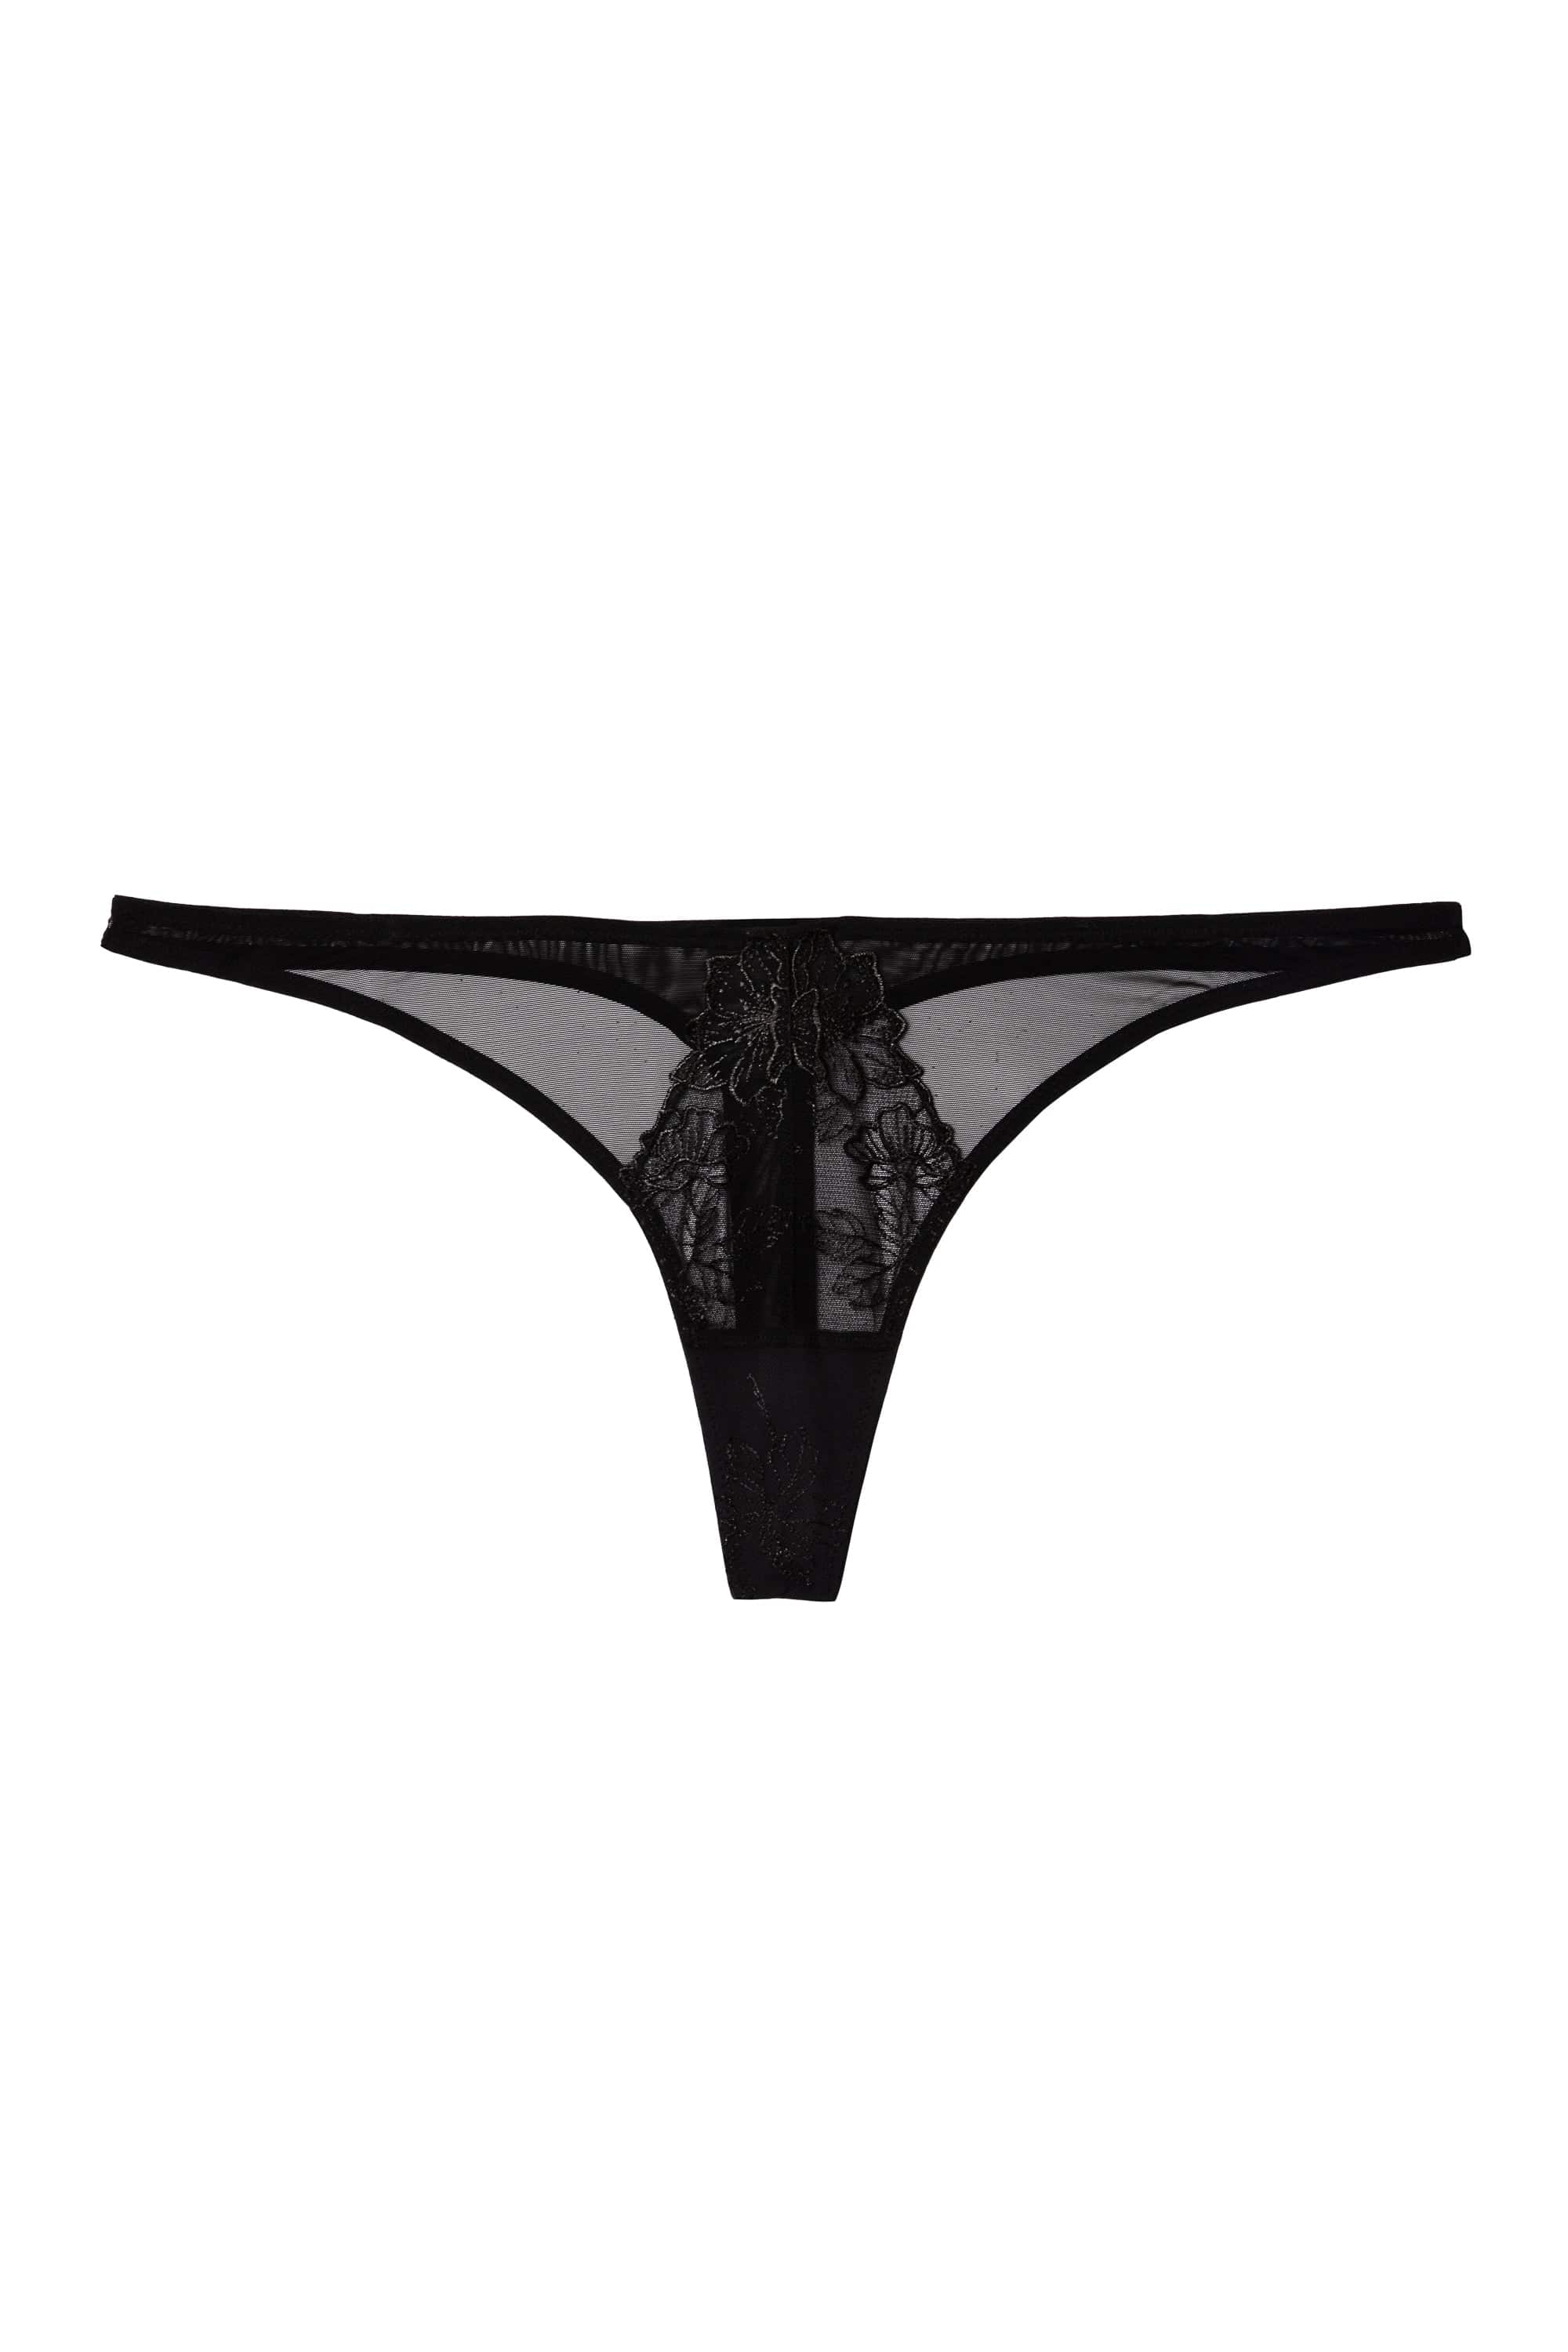 Marlowe Black Floral Embroidered Thong